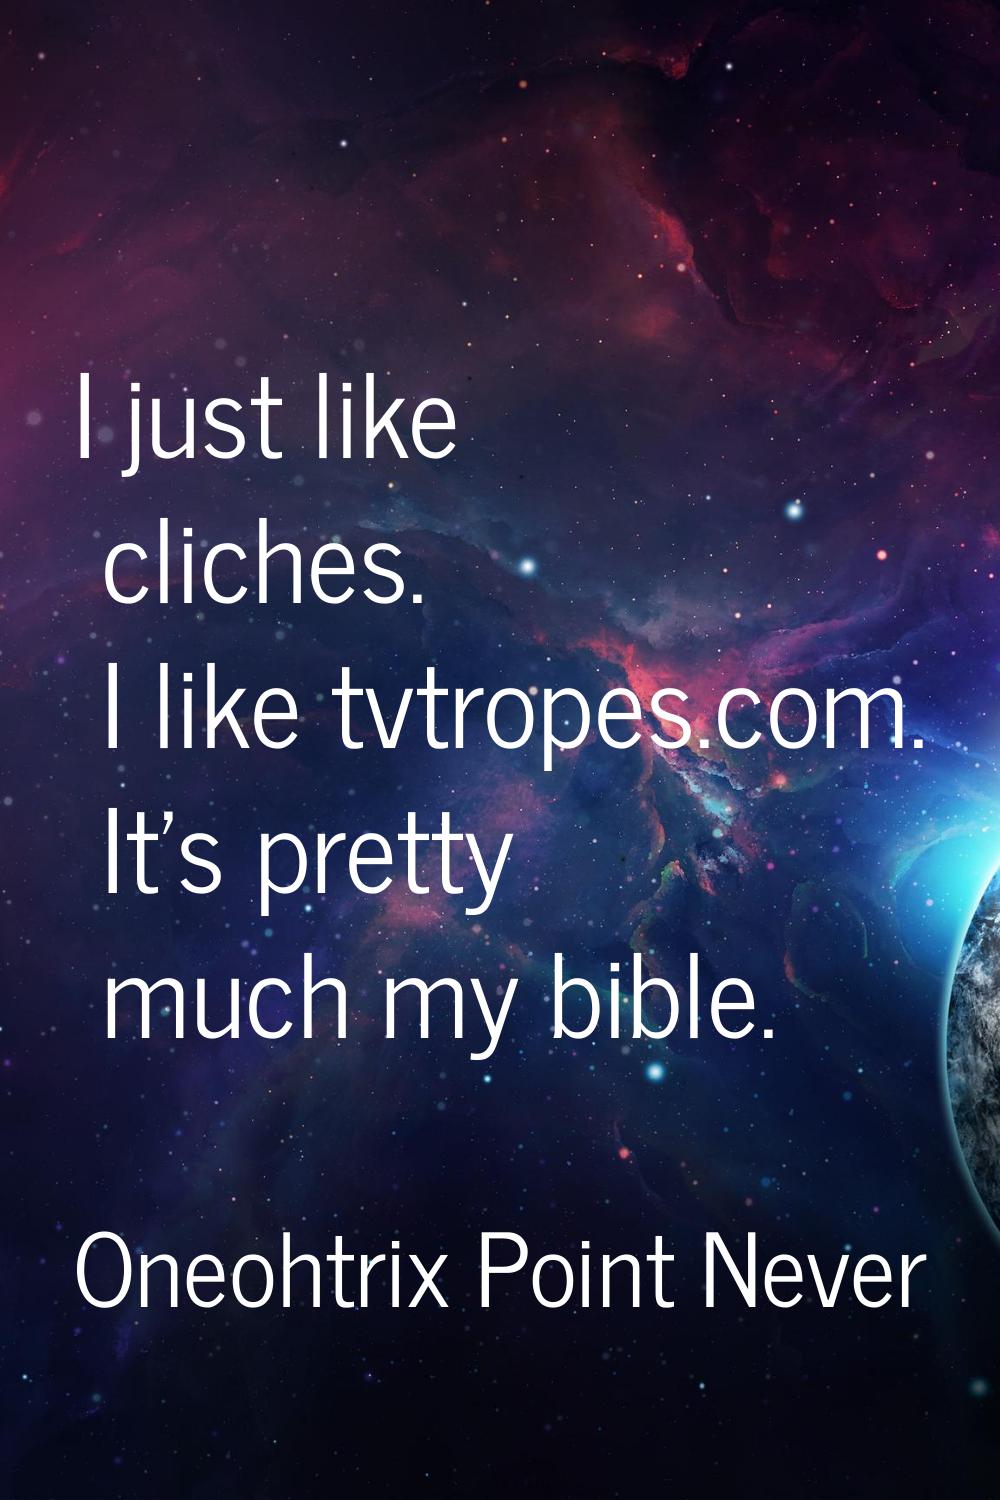 I just like cliches. I like tvtropes.com. It's pretty much my bible.